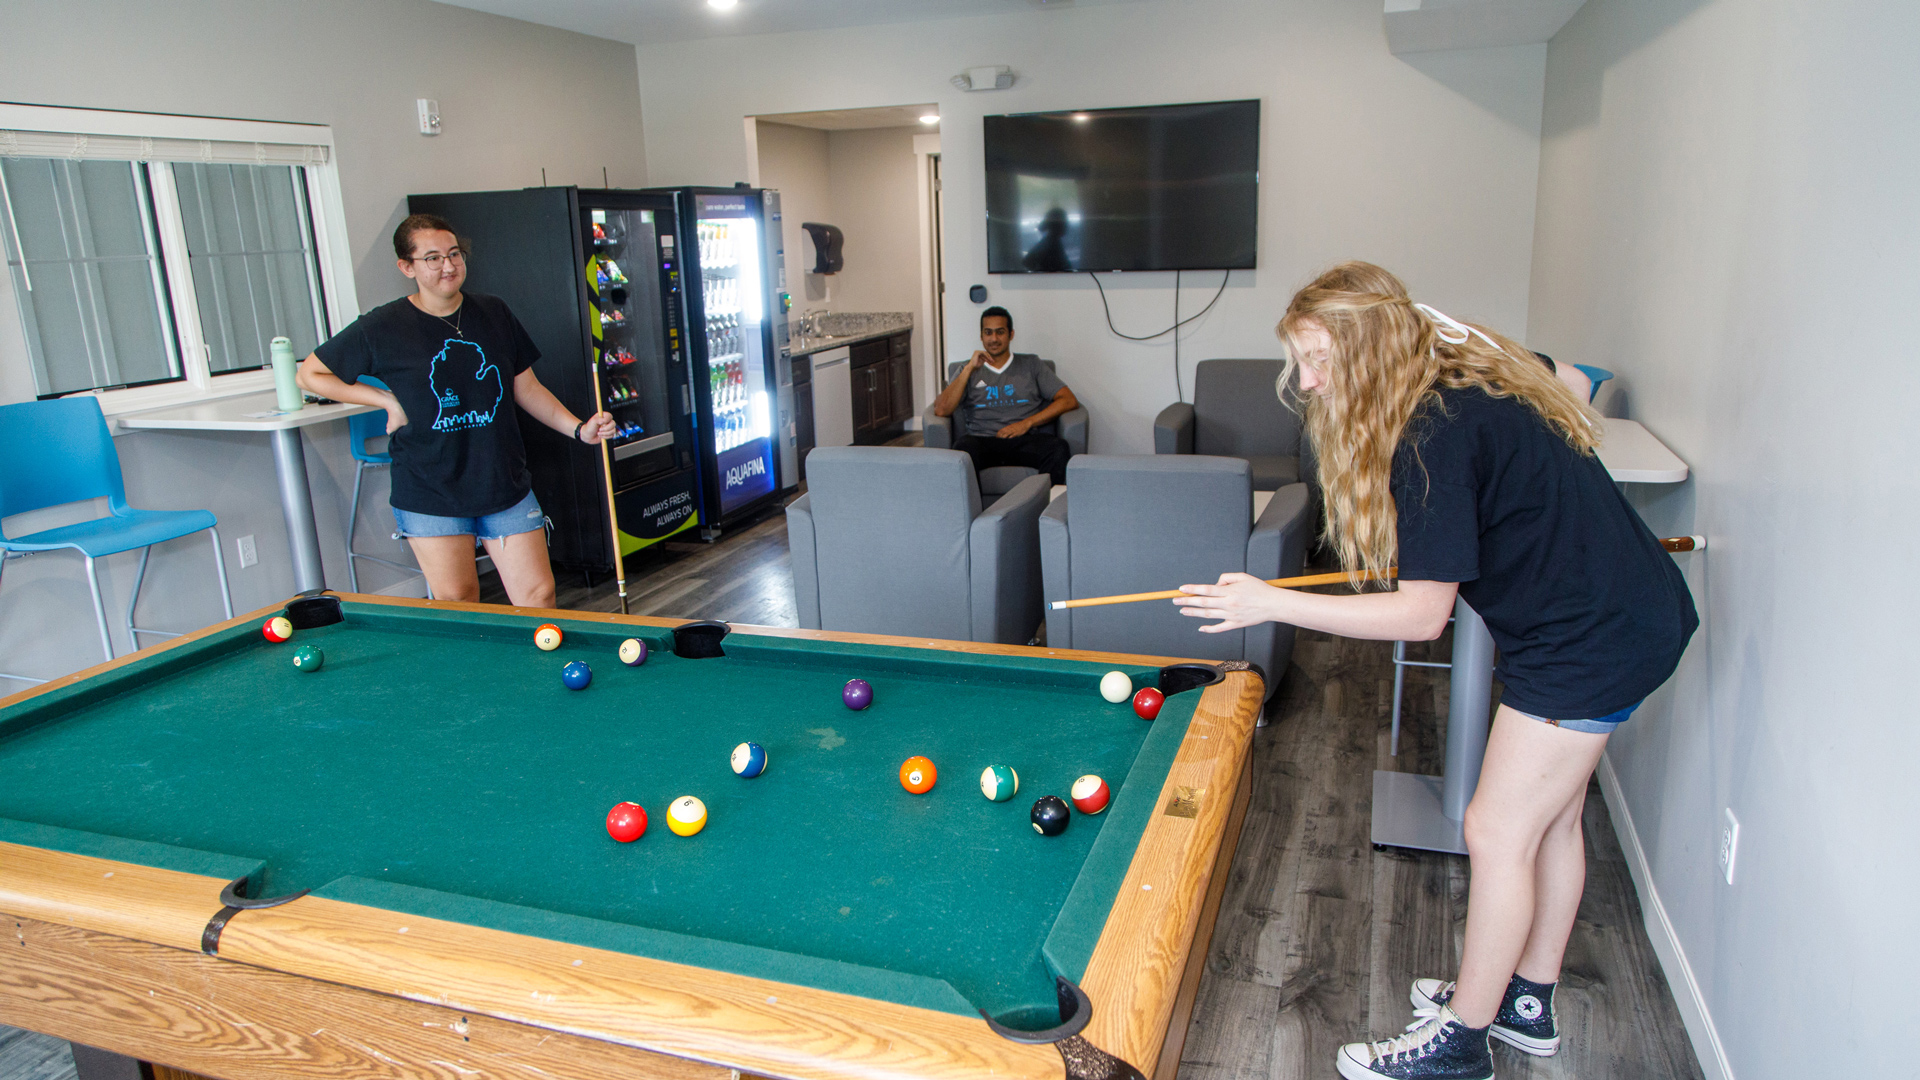 Grace students relaxing on chairs and playing pool in the Hilltop Community Room.